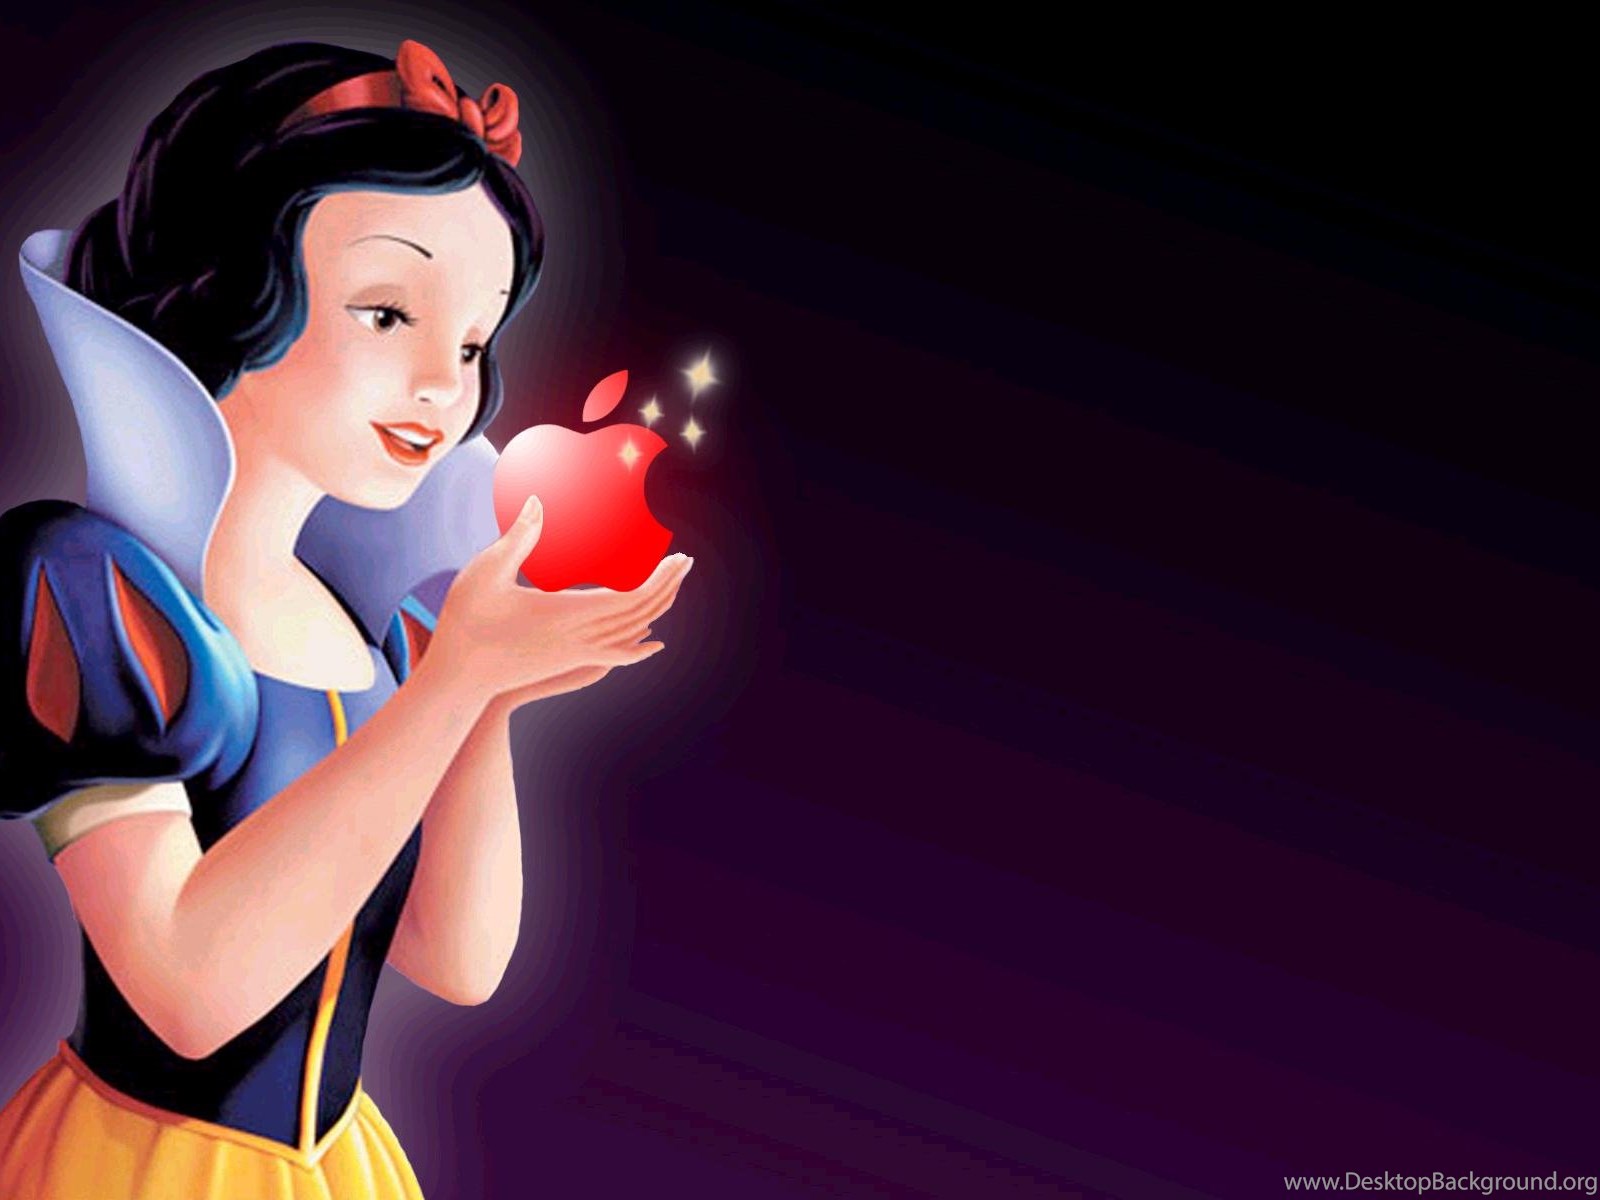 Download Snow White Cartoon HD Wallpapers For iPad Cartoons Wallpapers Full...